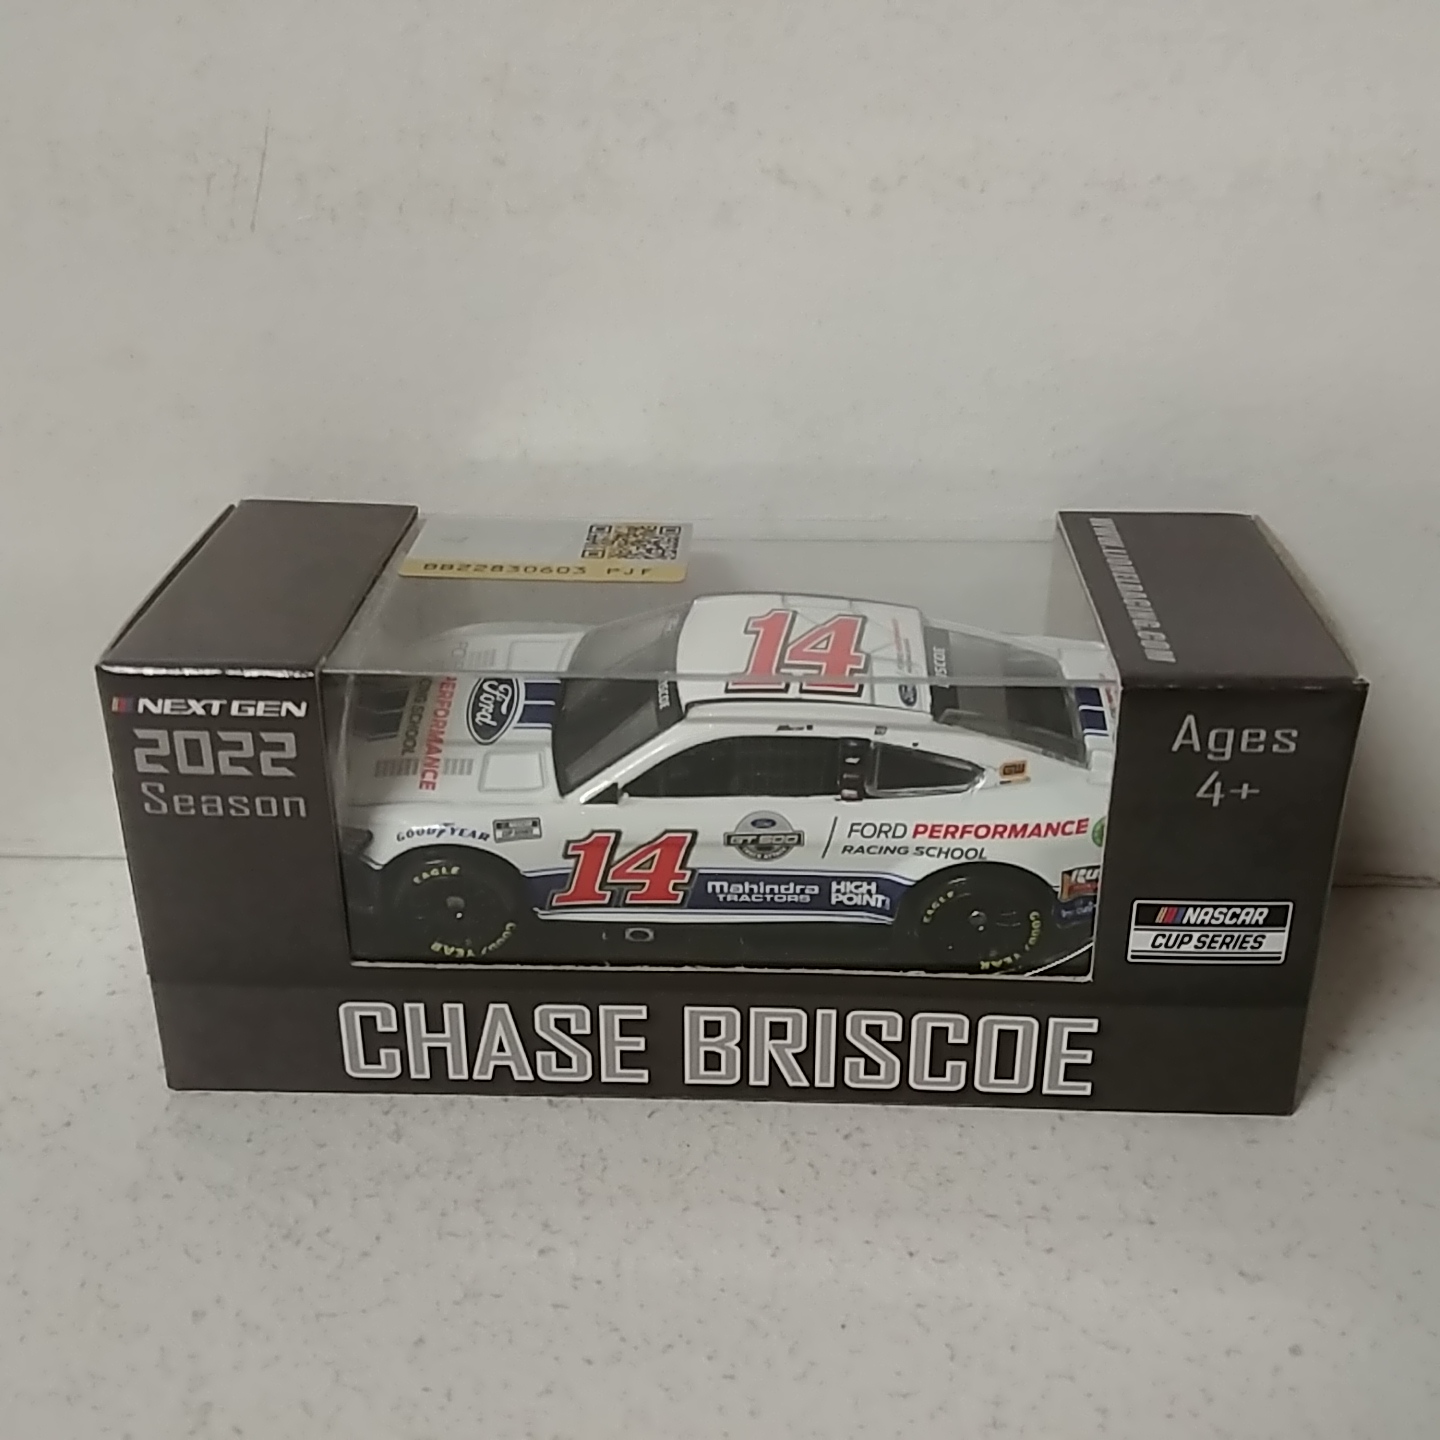 2022 Chase Briscoe 1/64th Ford Performance Racing School "Next Gen" Mustang